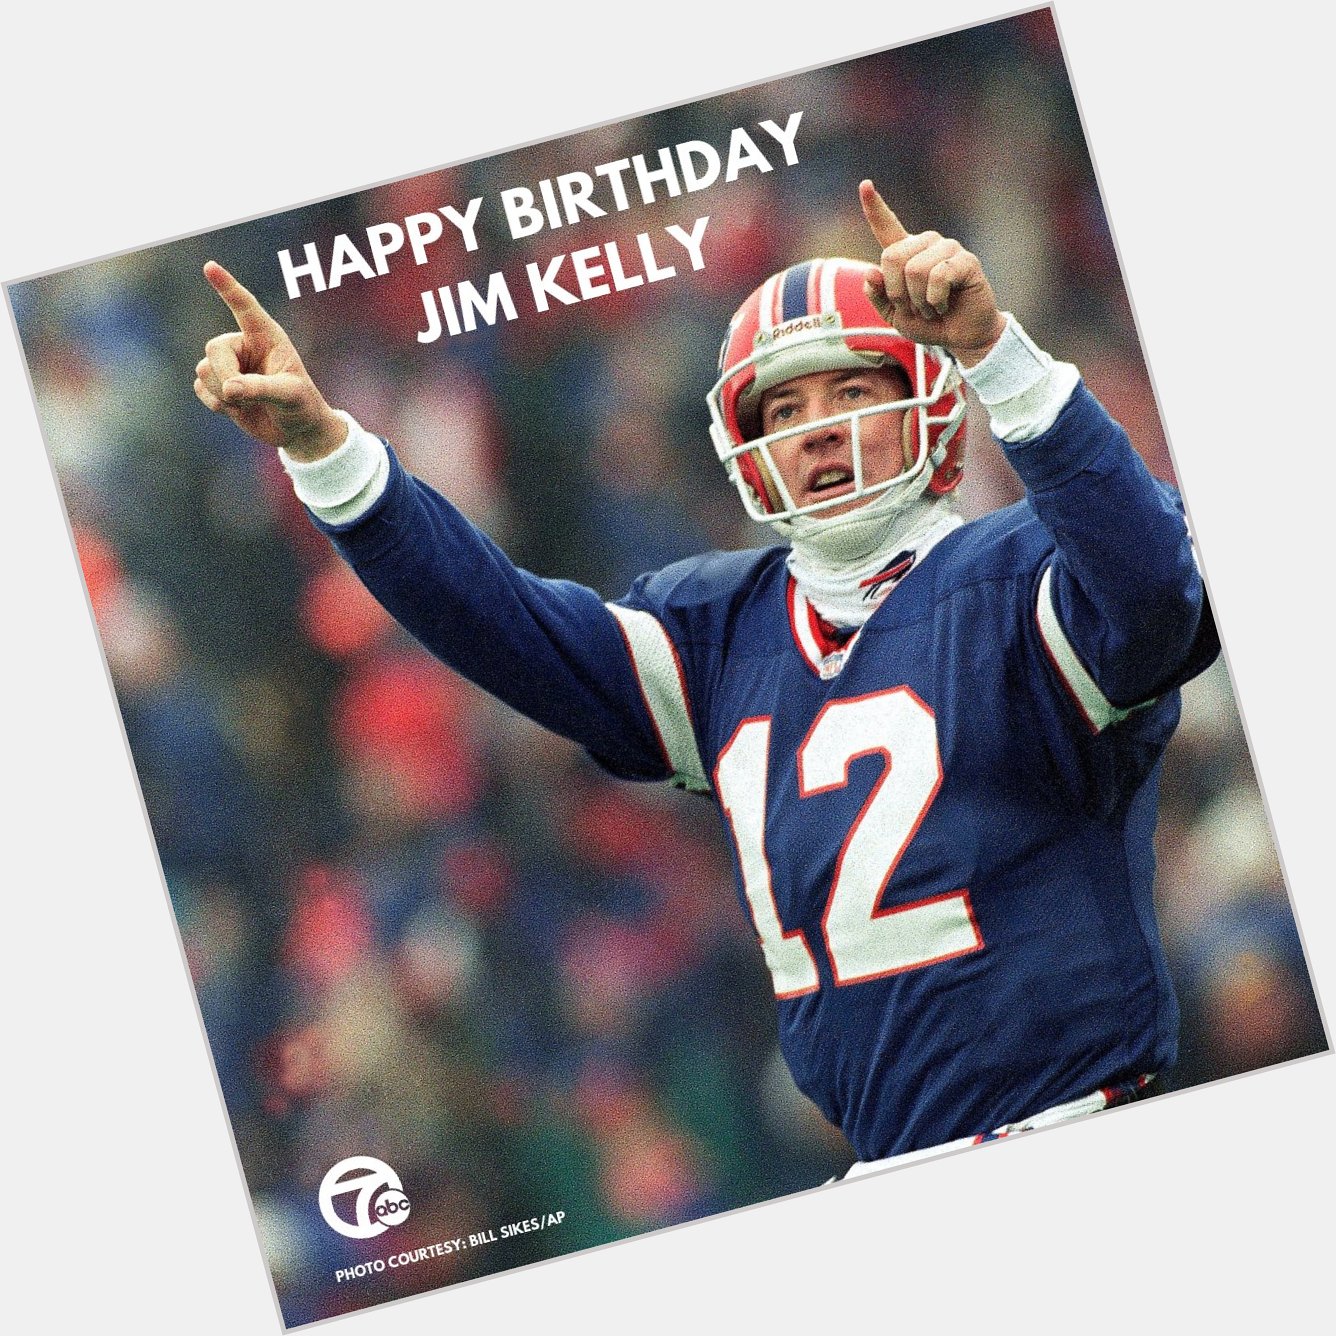 Join us in wishing a very happy birthday to Buffalo Bills Hall of Fame quarterback Jim Kelly! 